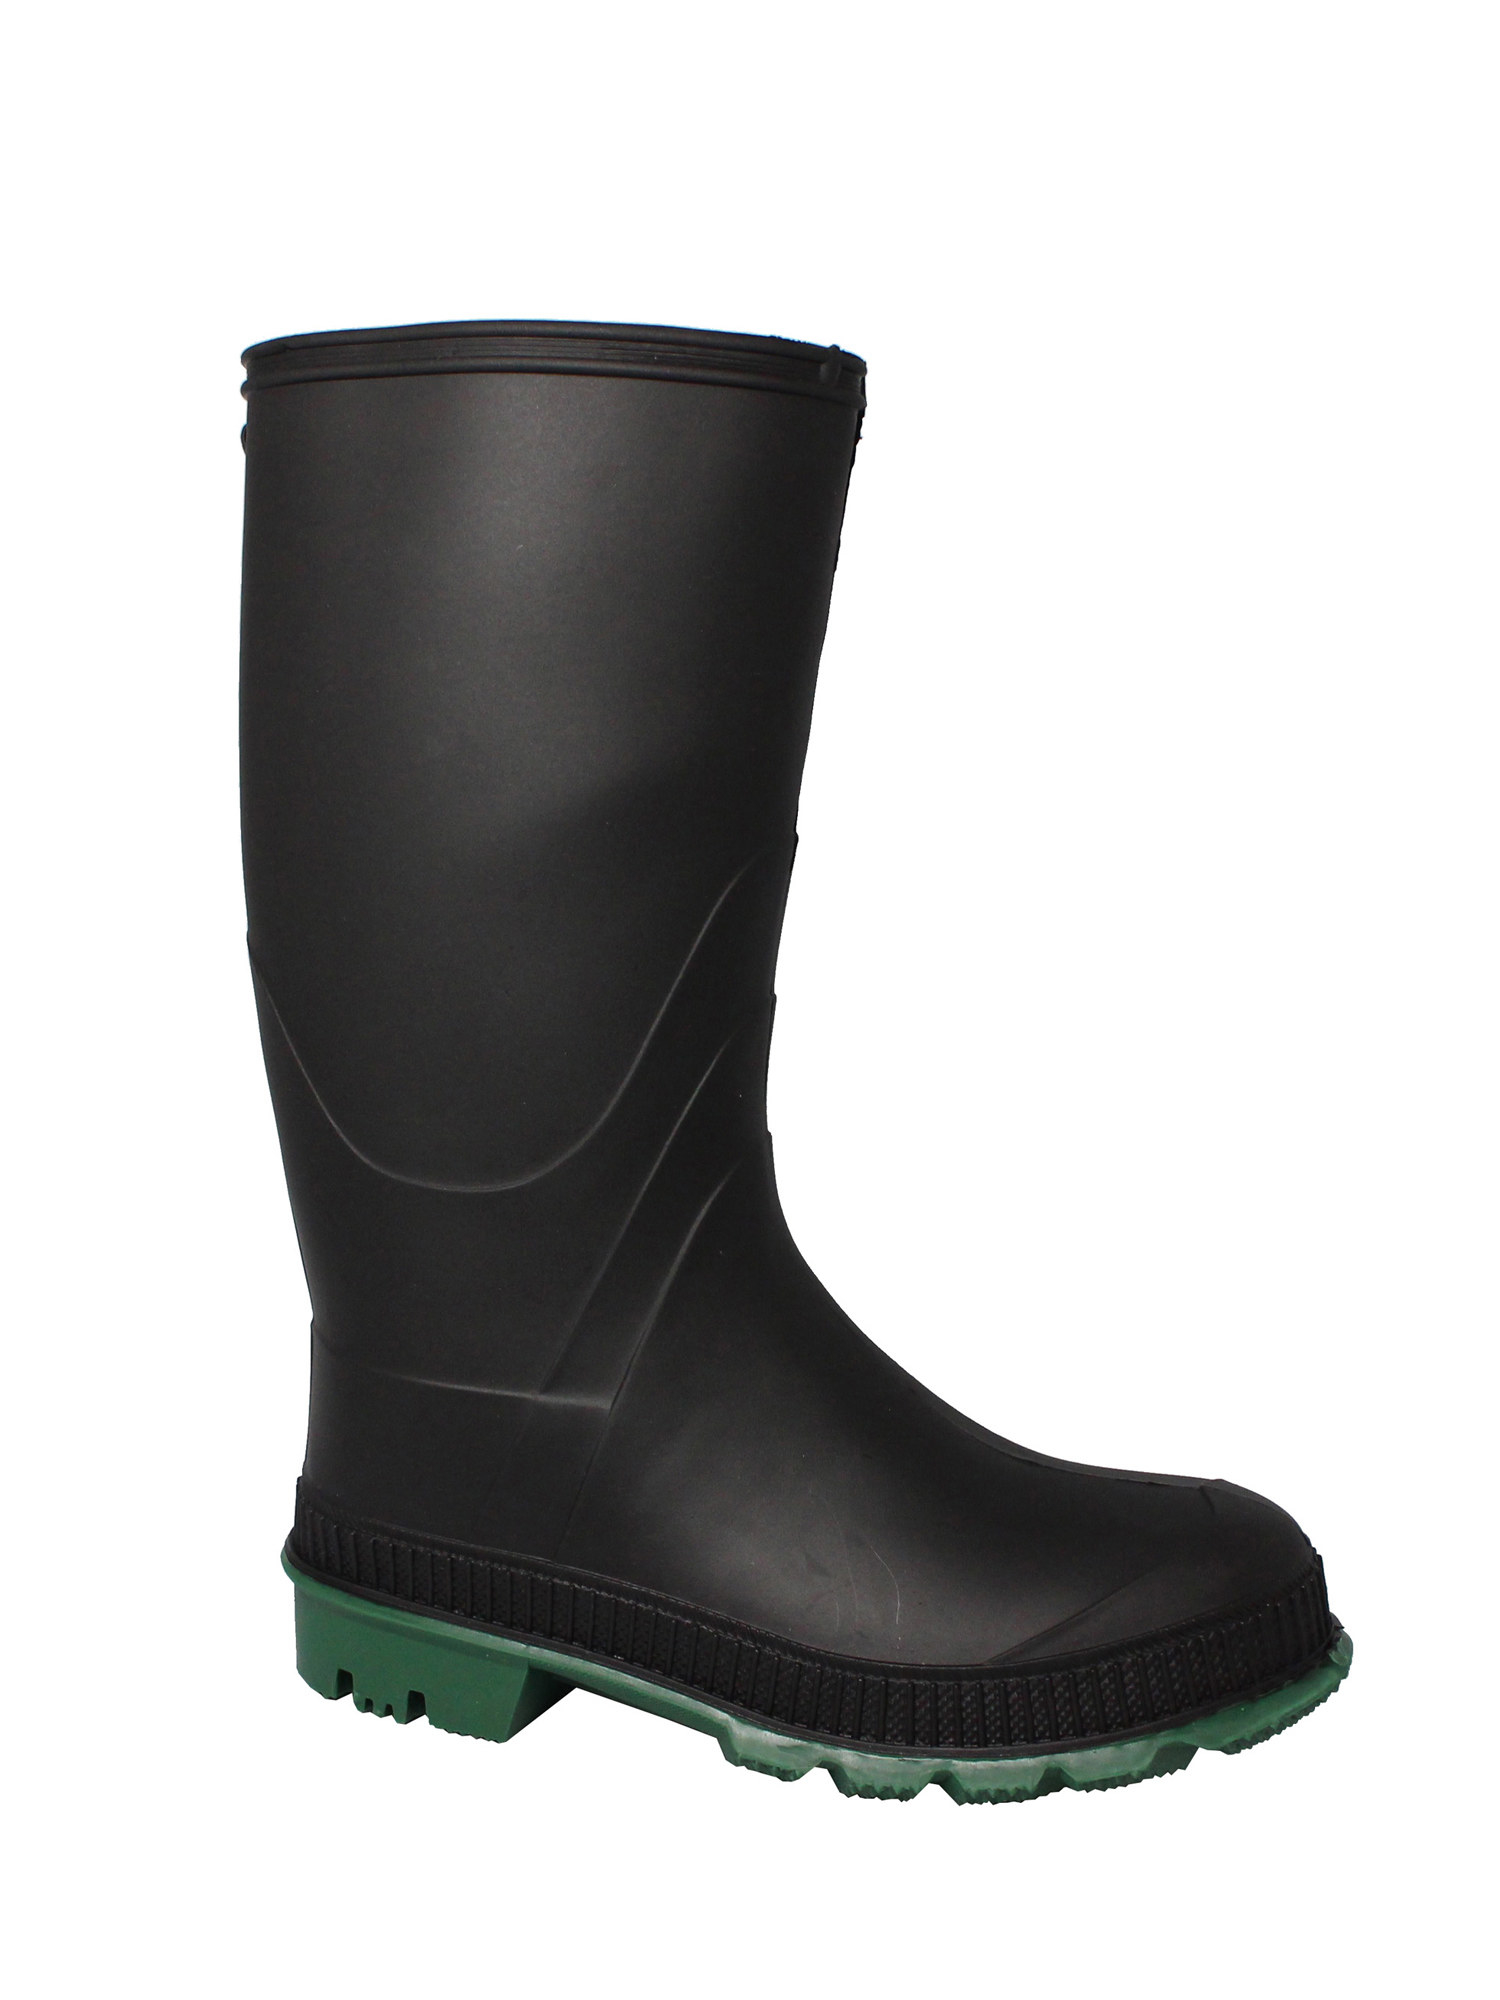 places to buy rain boots